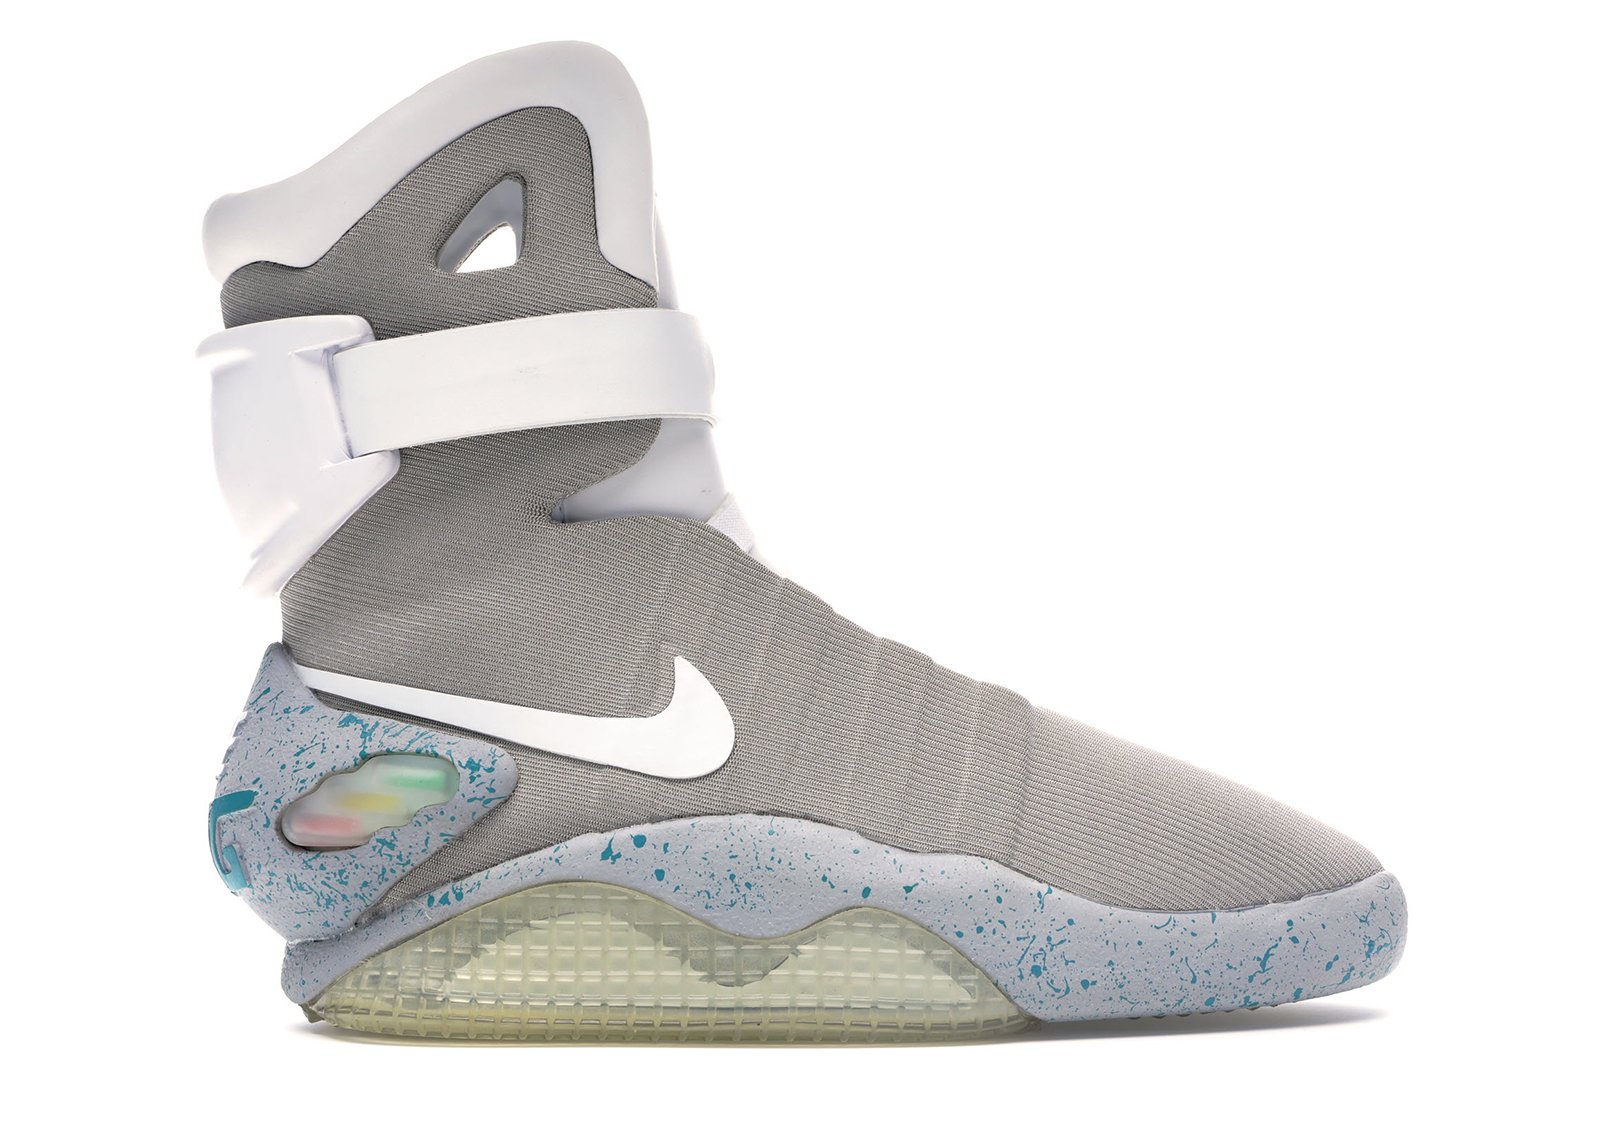 Nike MAG Back to the Future (2011) sneaker informations